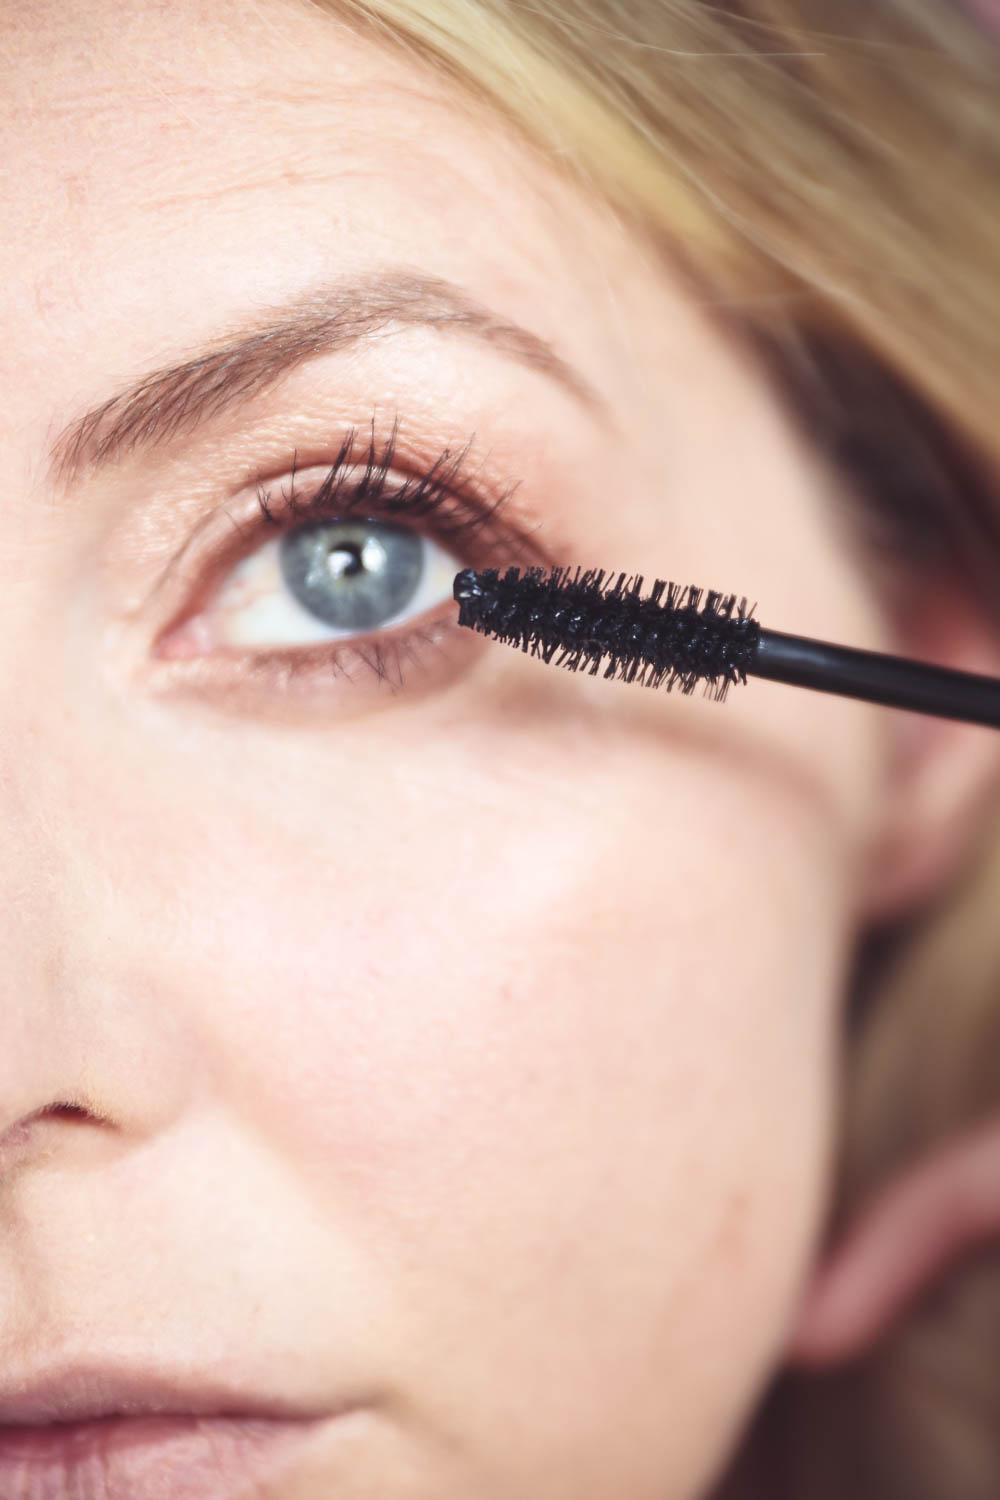 5-Minute makeup routine featuring charlotte tilbury big fat lashes mascara